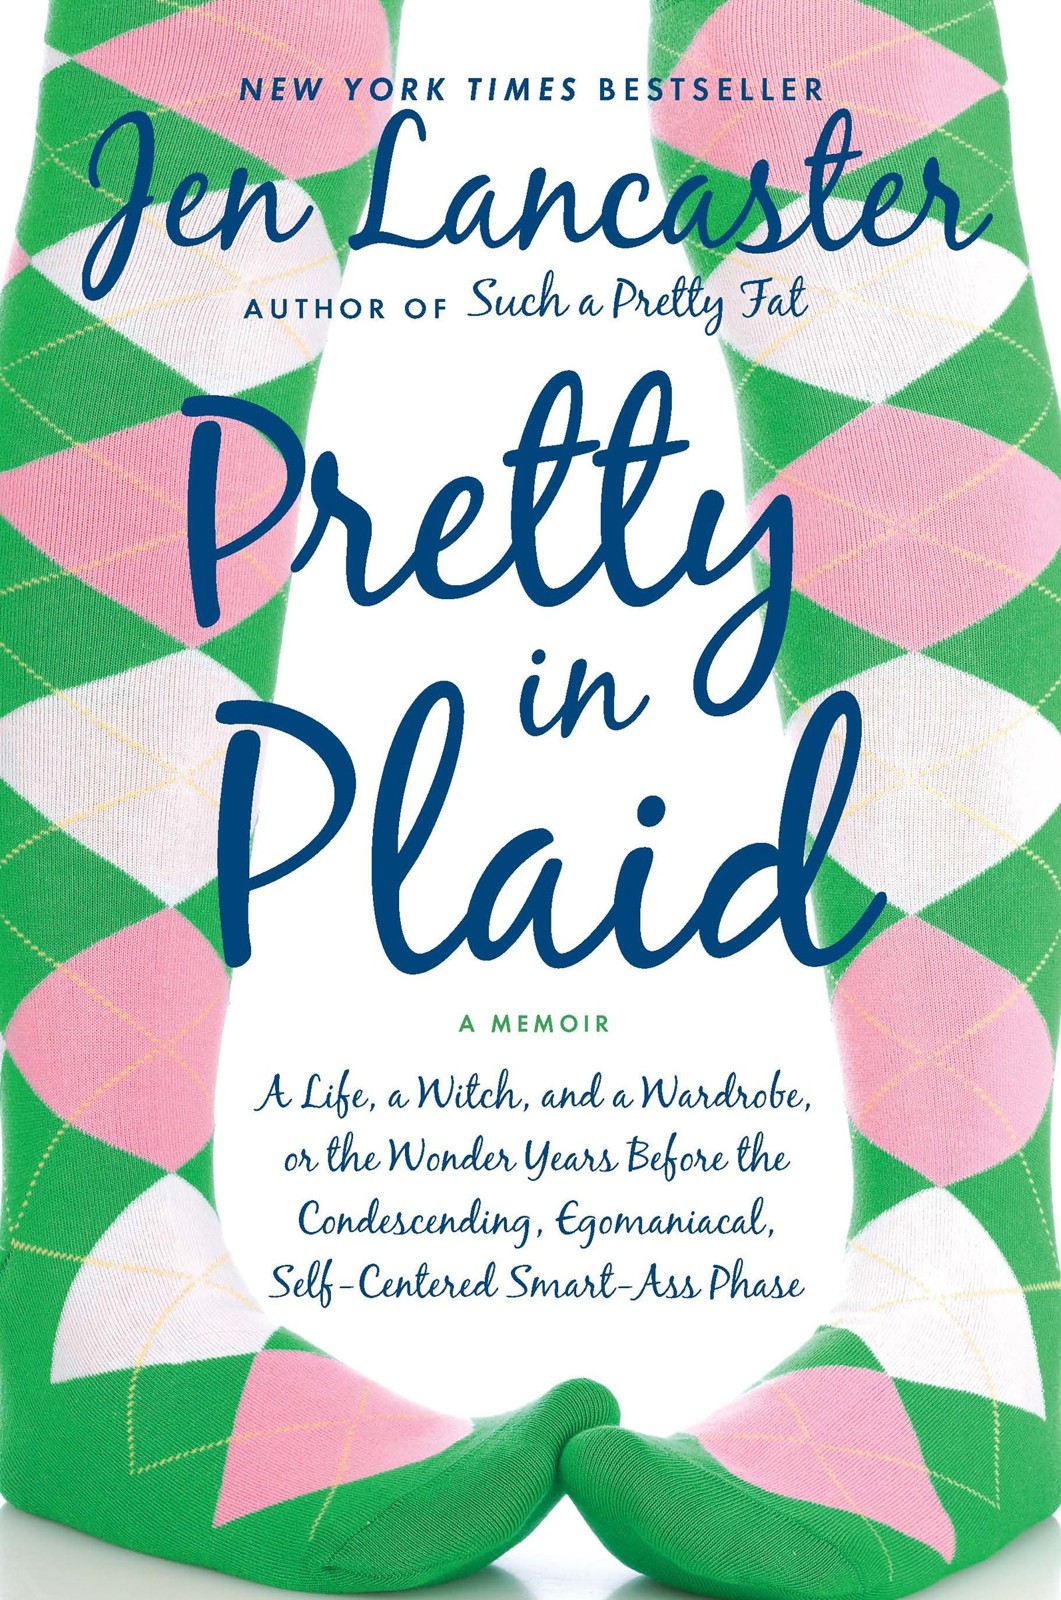 Pretty in Plaid: A Life, a Witch, and a Wardrobe, or the Wonder Years Before the Condescending, Egomaniacal Self-Centered Smart-Ass Phase by Jen Lancaster